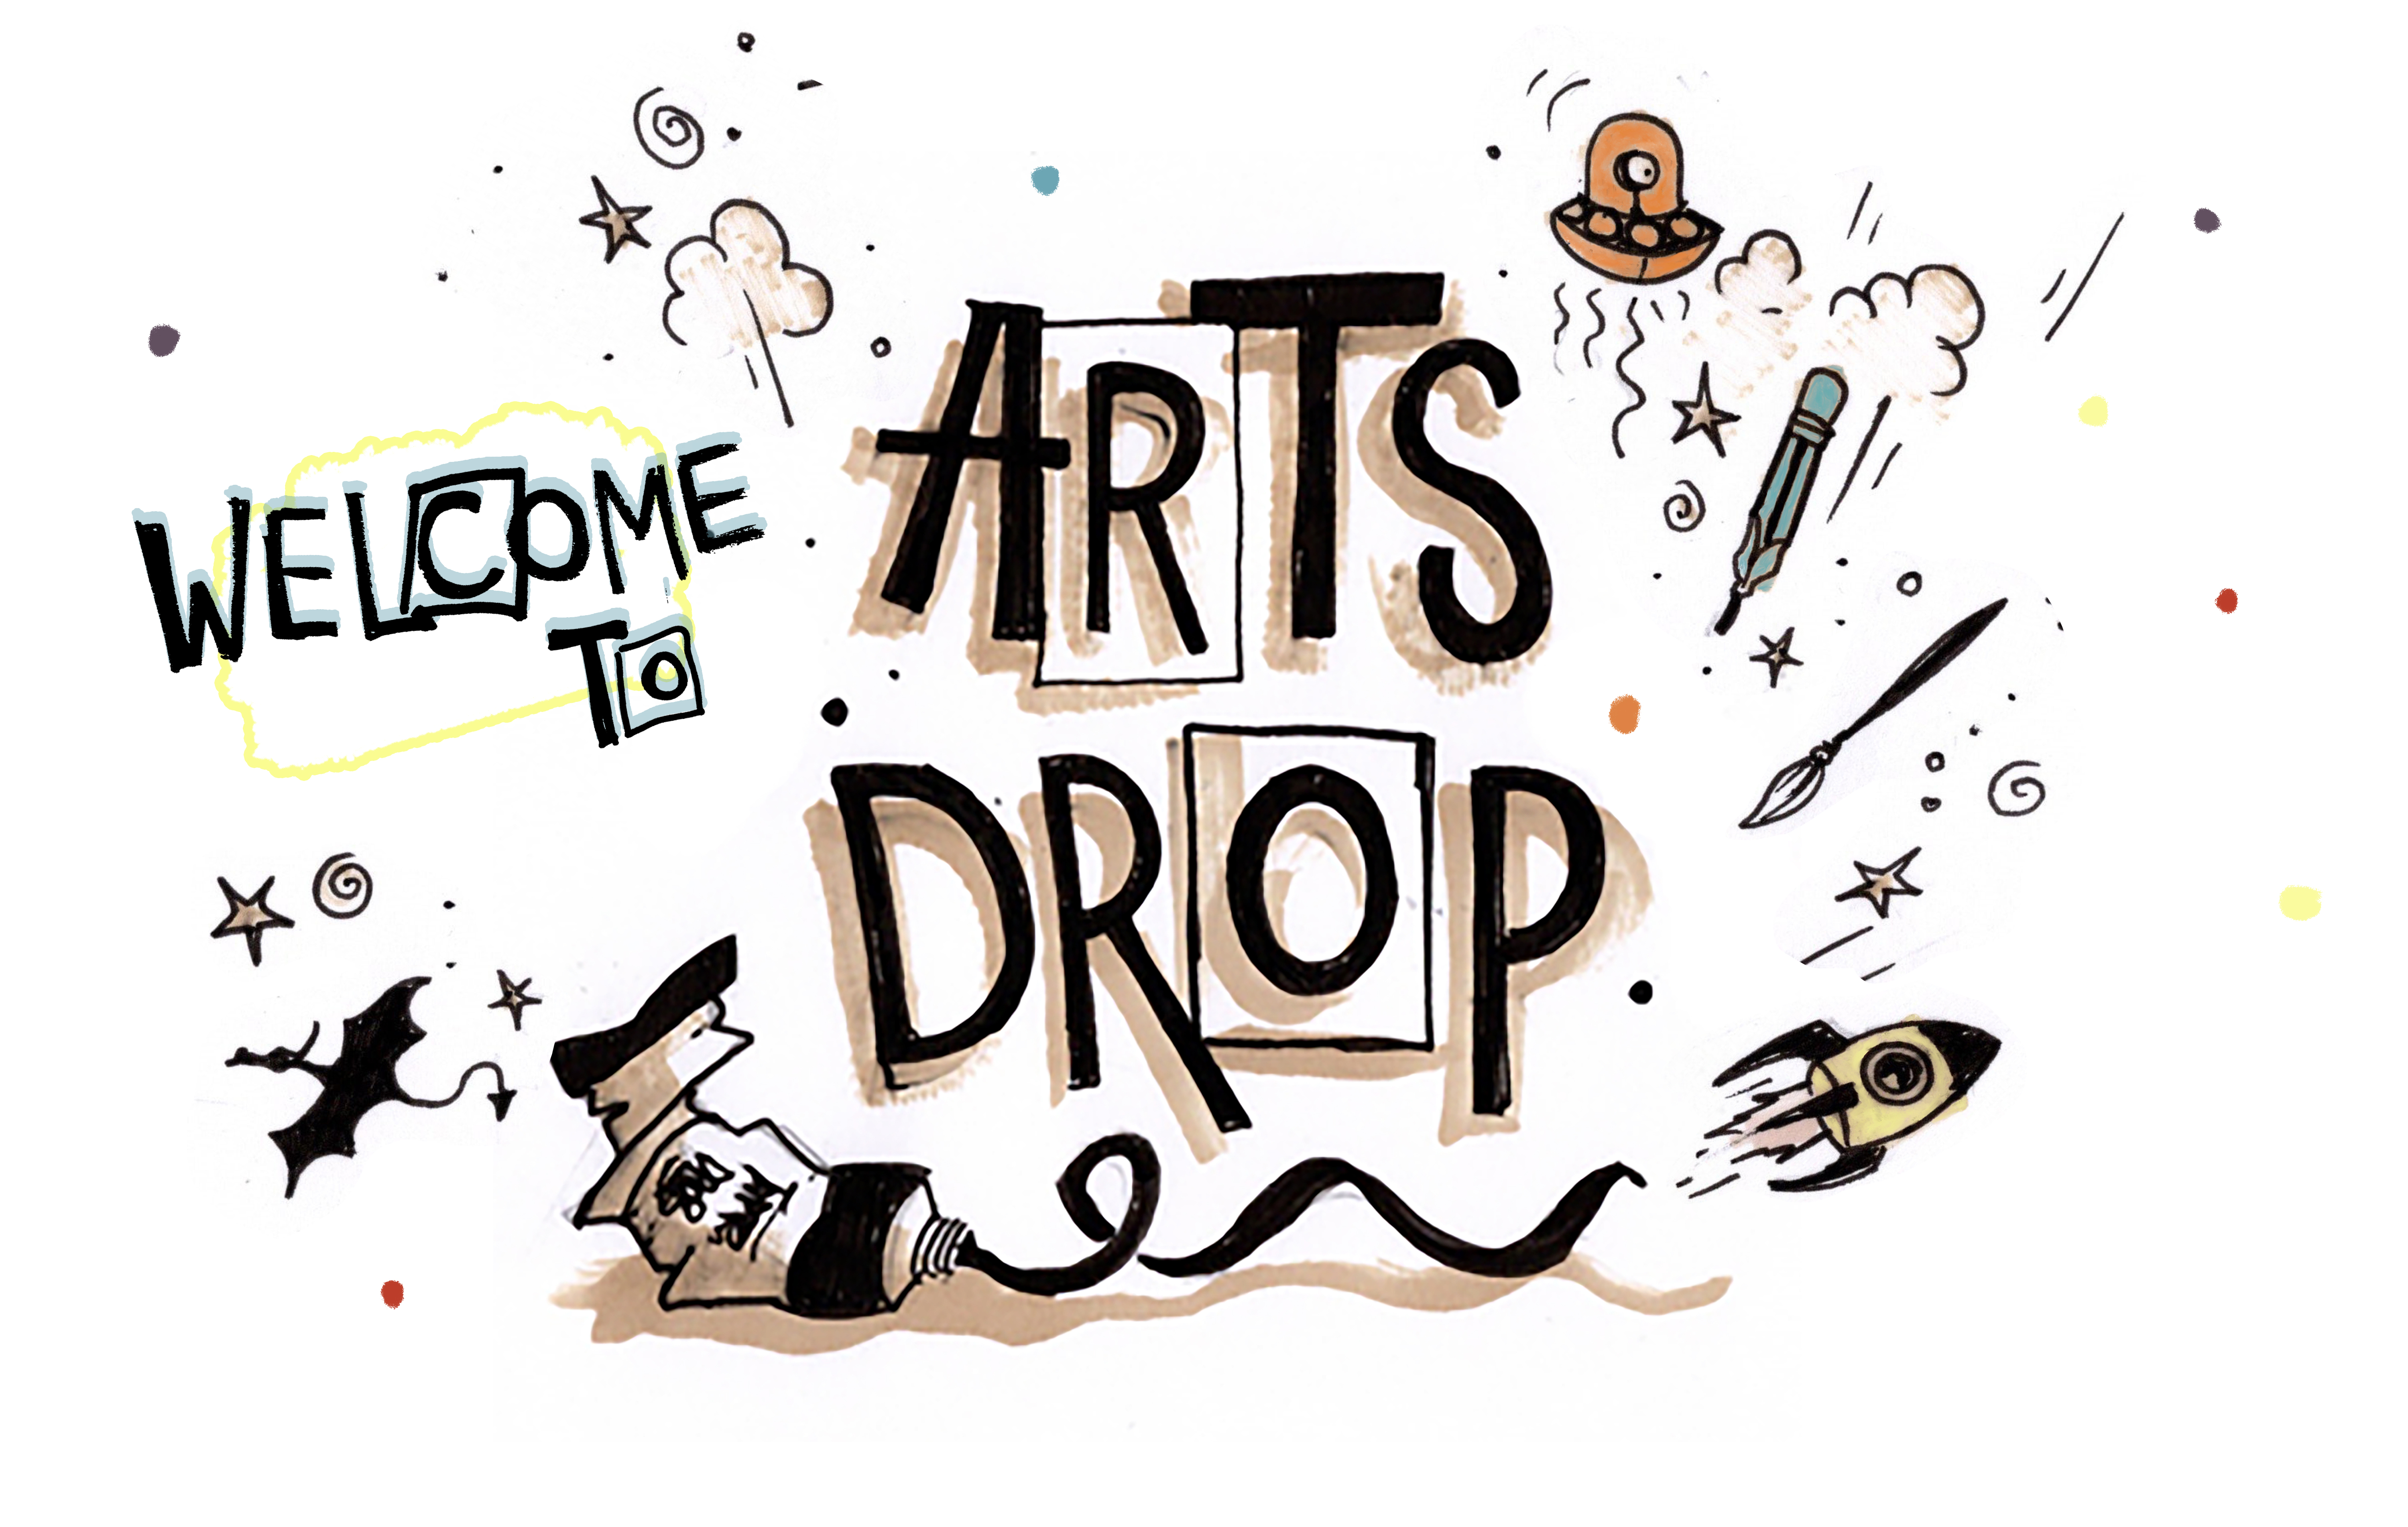 Welcome to Arts Drop graphic